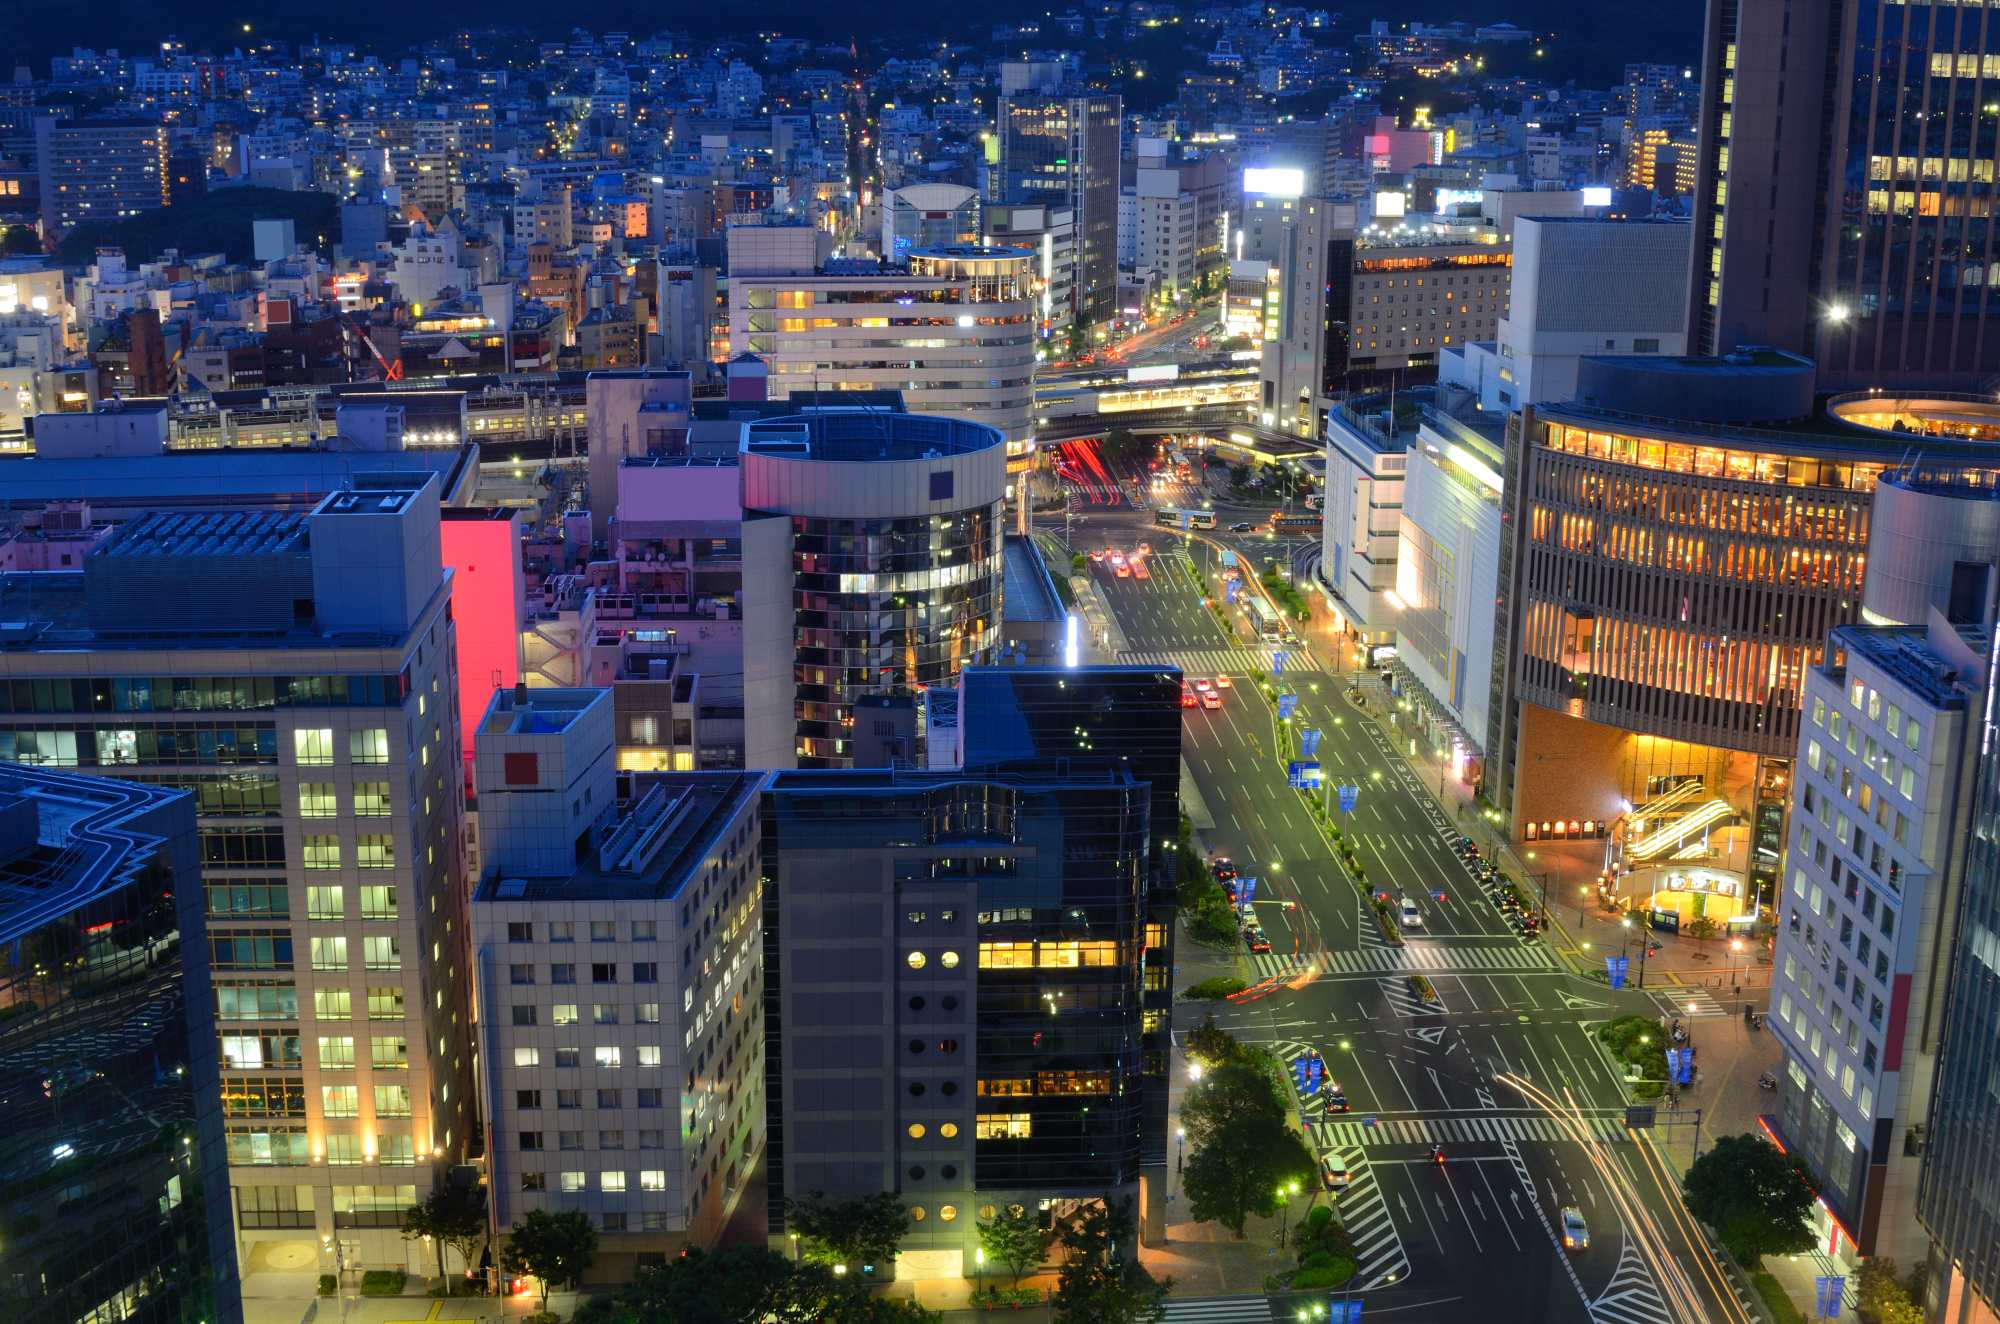 Urban encounters: The area of Sannomiya in Kobe is known for its vibrant nightlife. | GETTY IMAGES